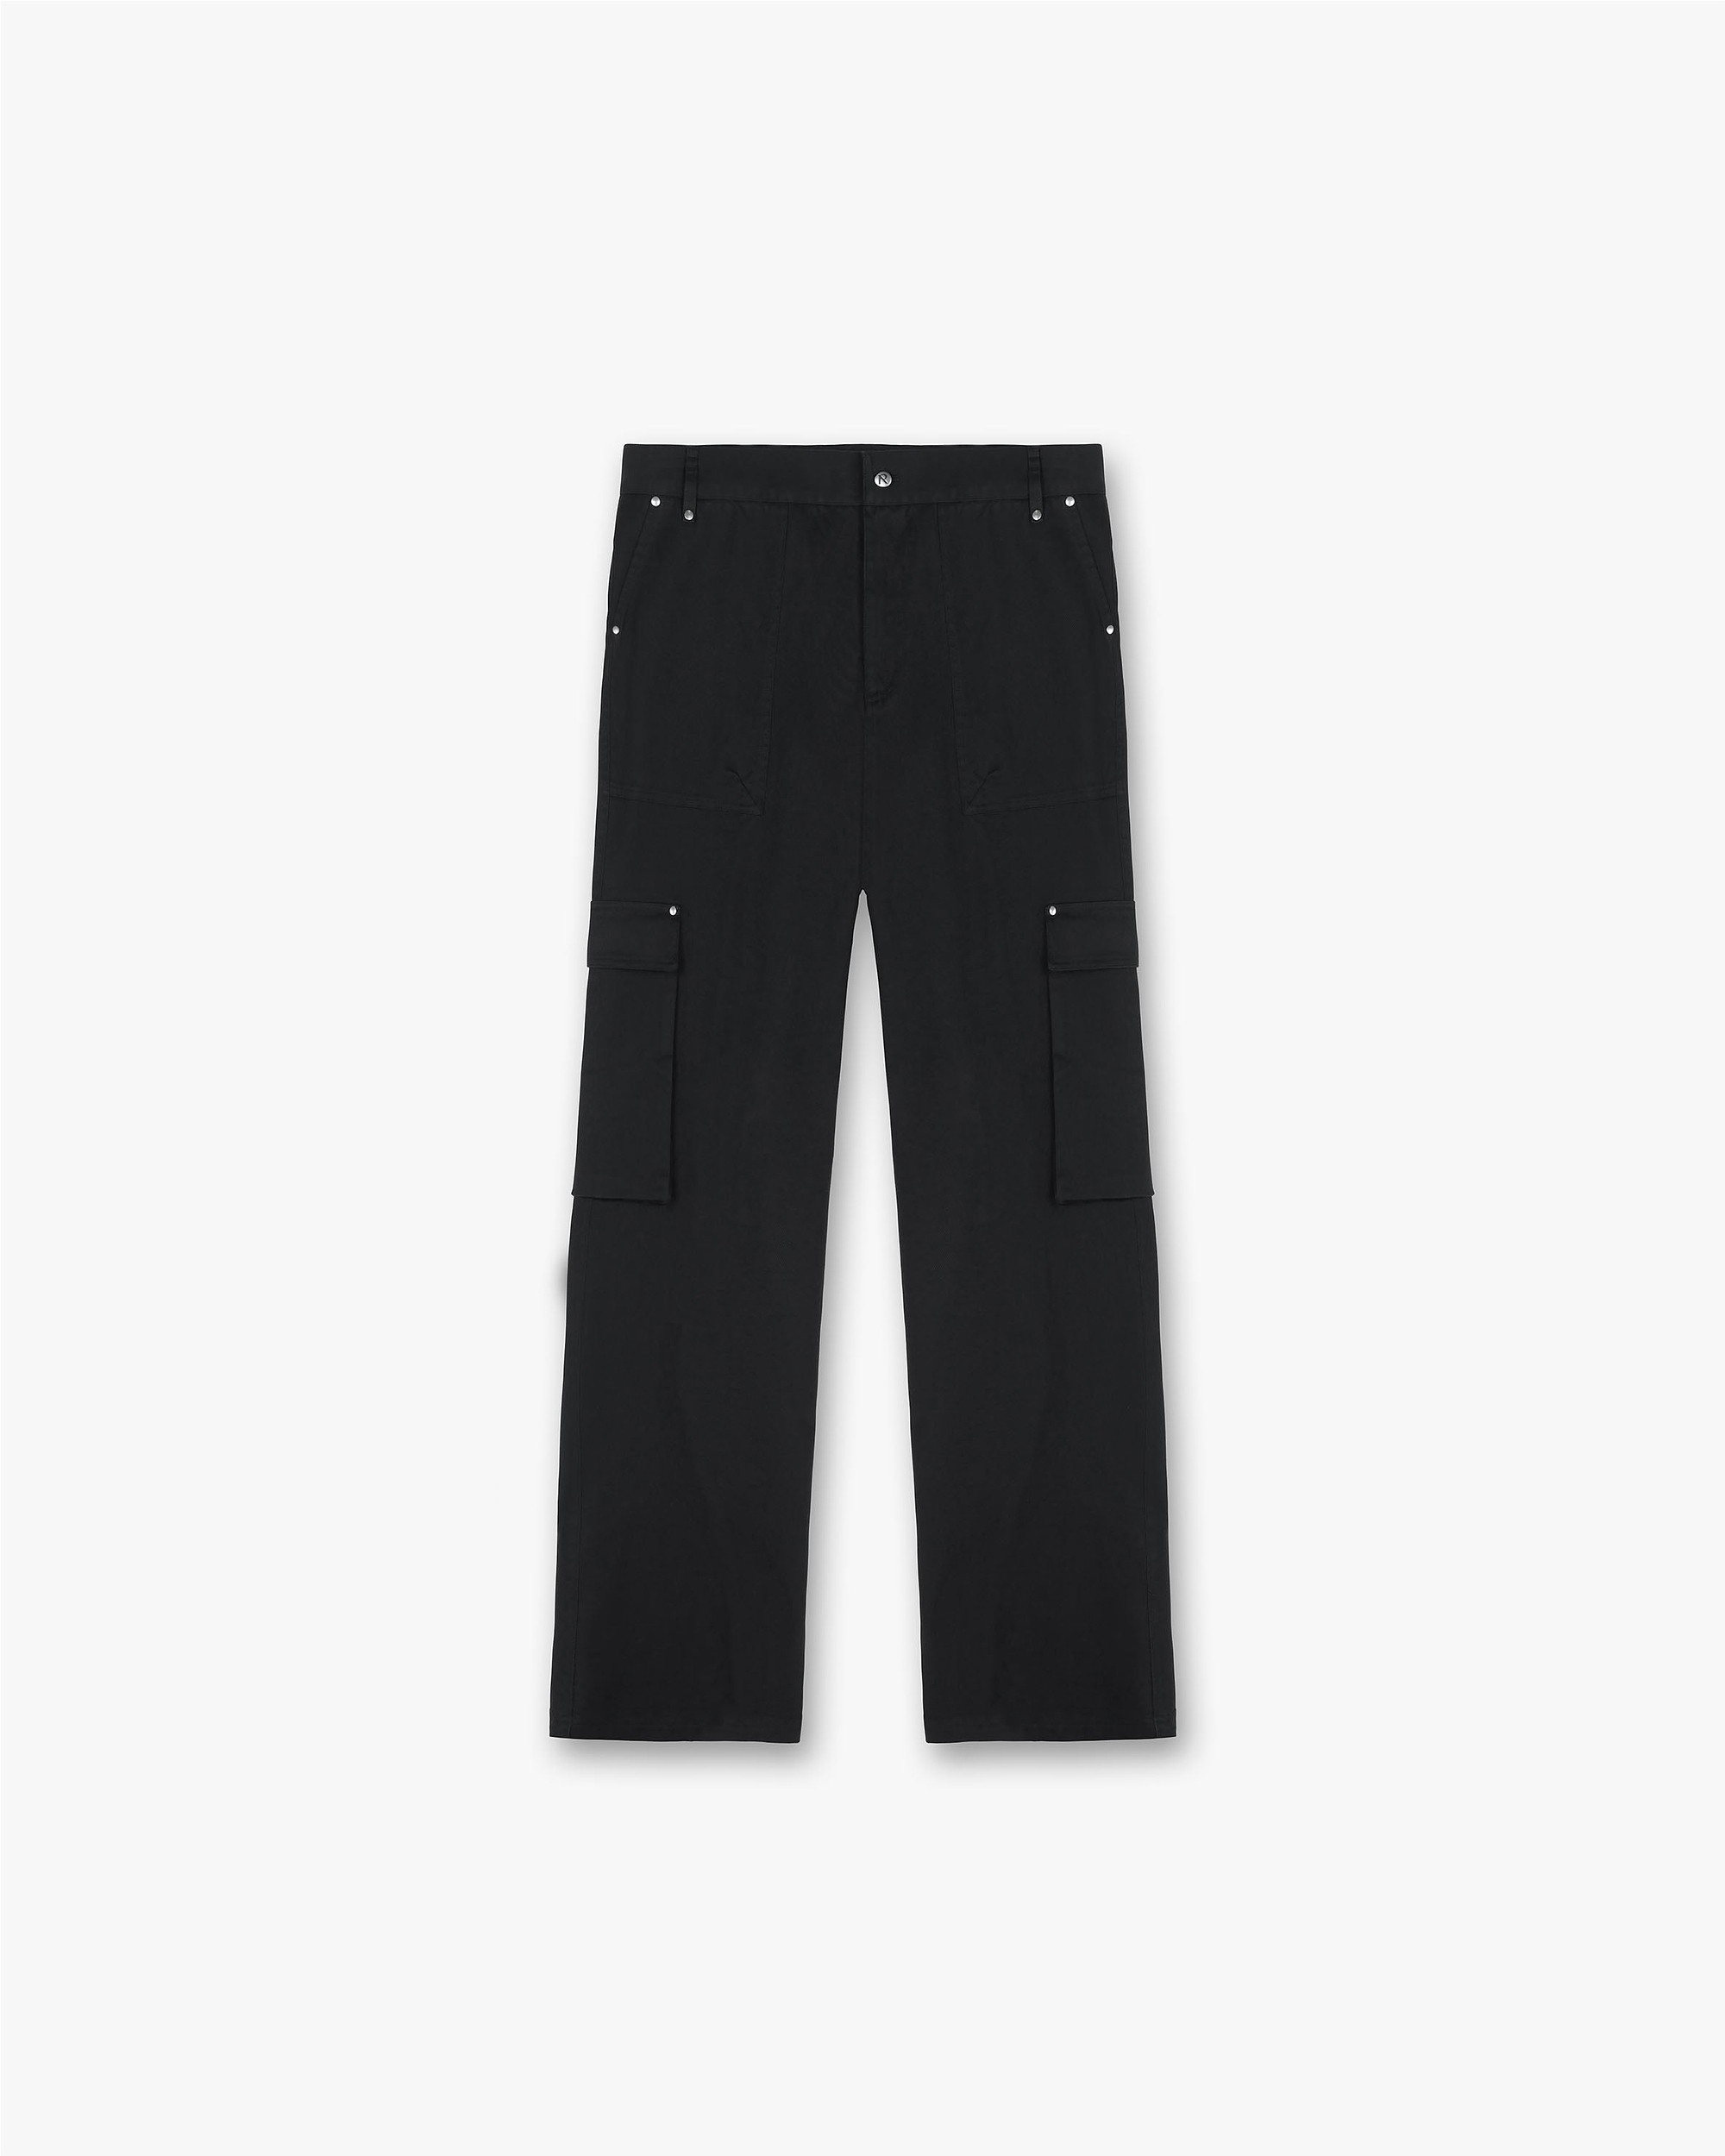 The Goods Clo- Convertible Utility Cargo Pants “Black” – THE GOODS CLO